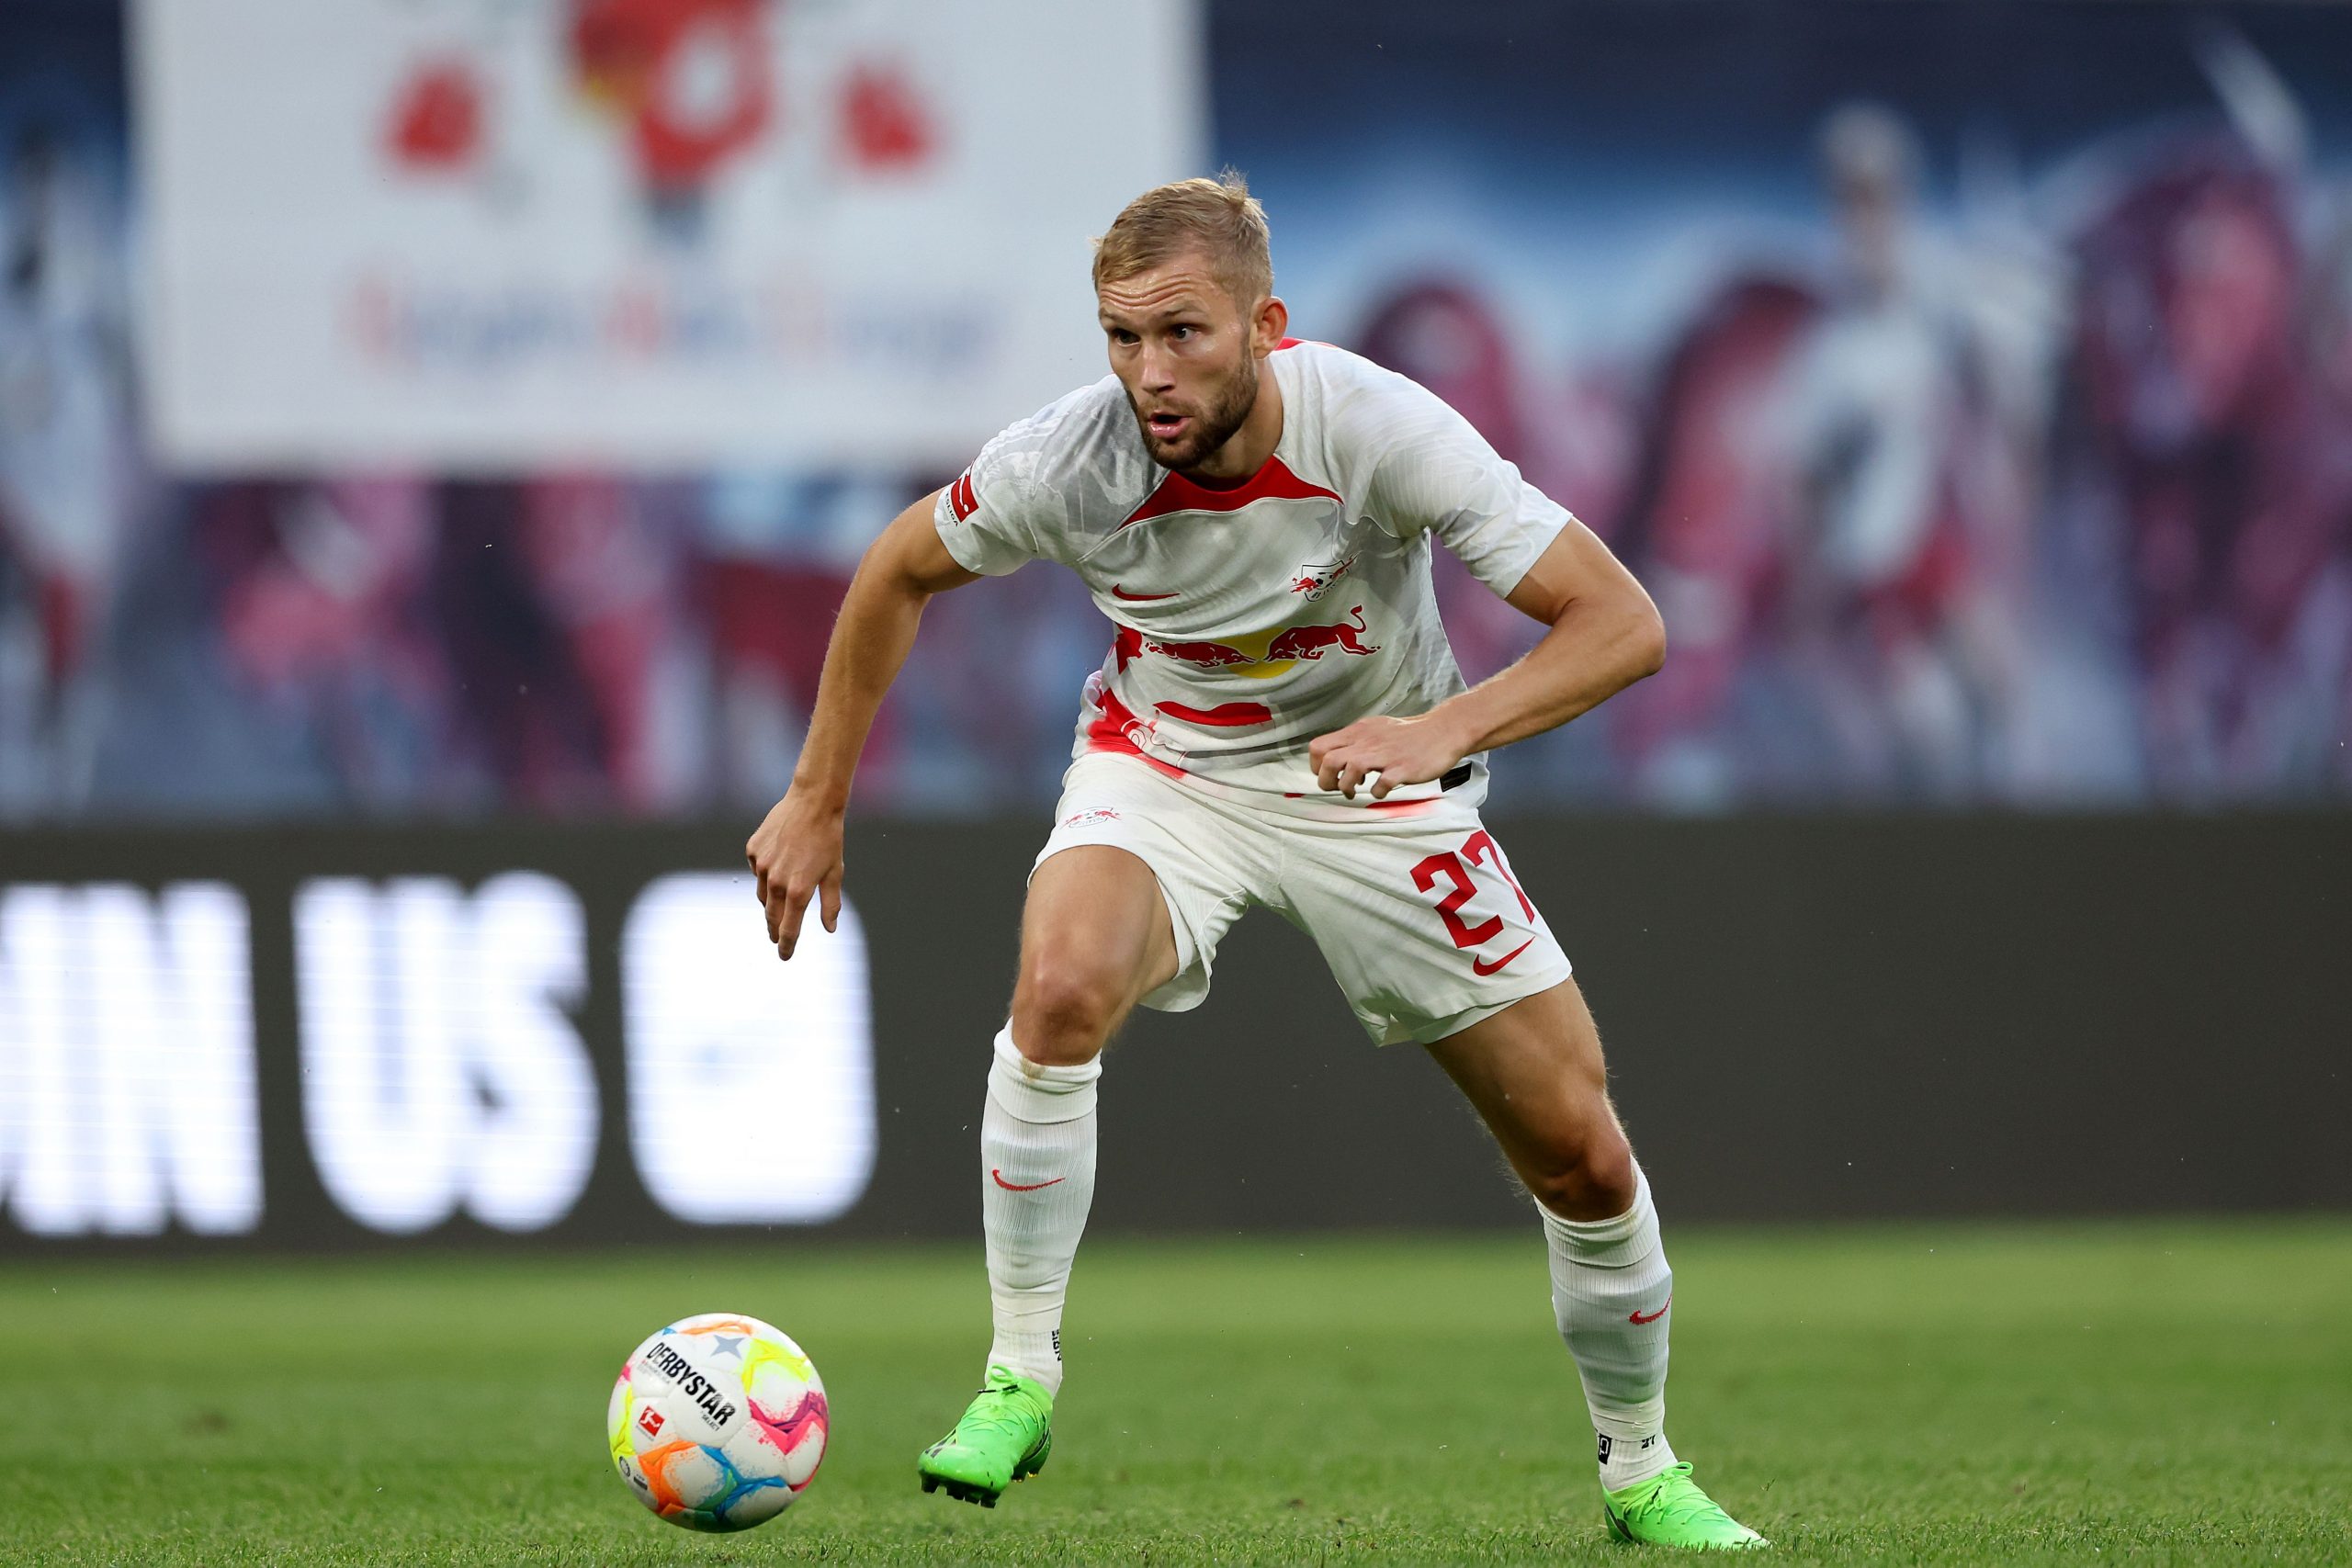 RB Leipzig midfielder and Manchester United summer target Konrad Laimer open to Premier League move.